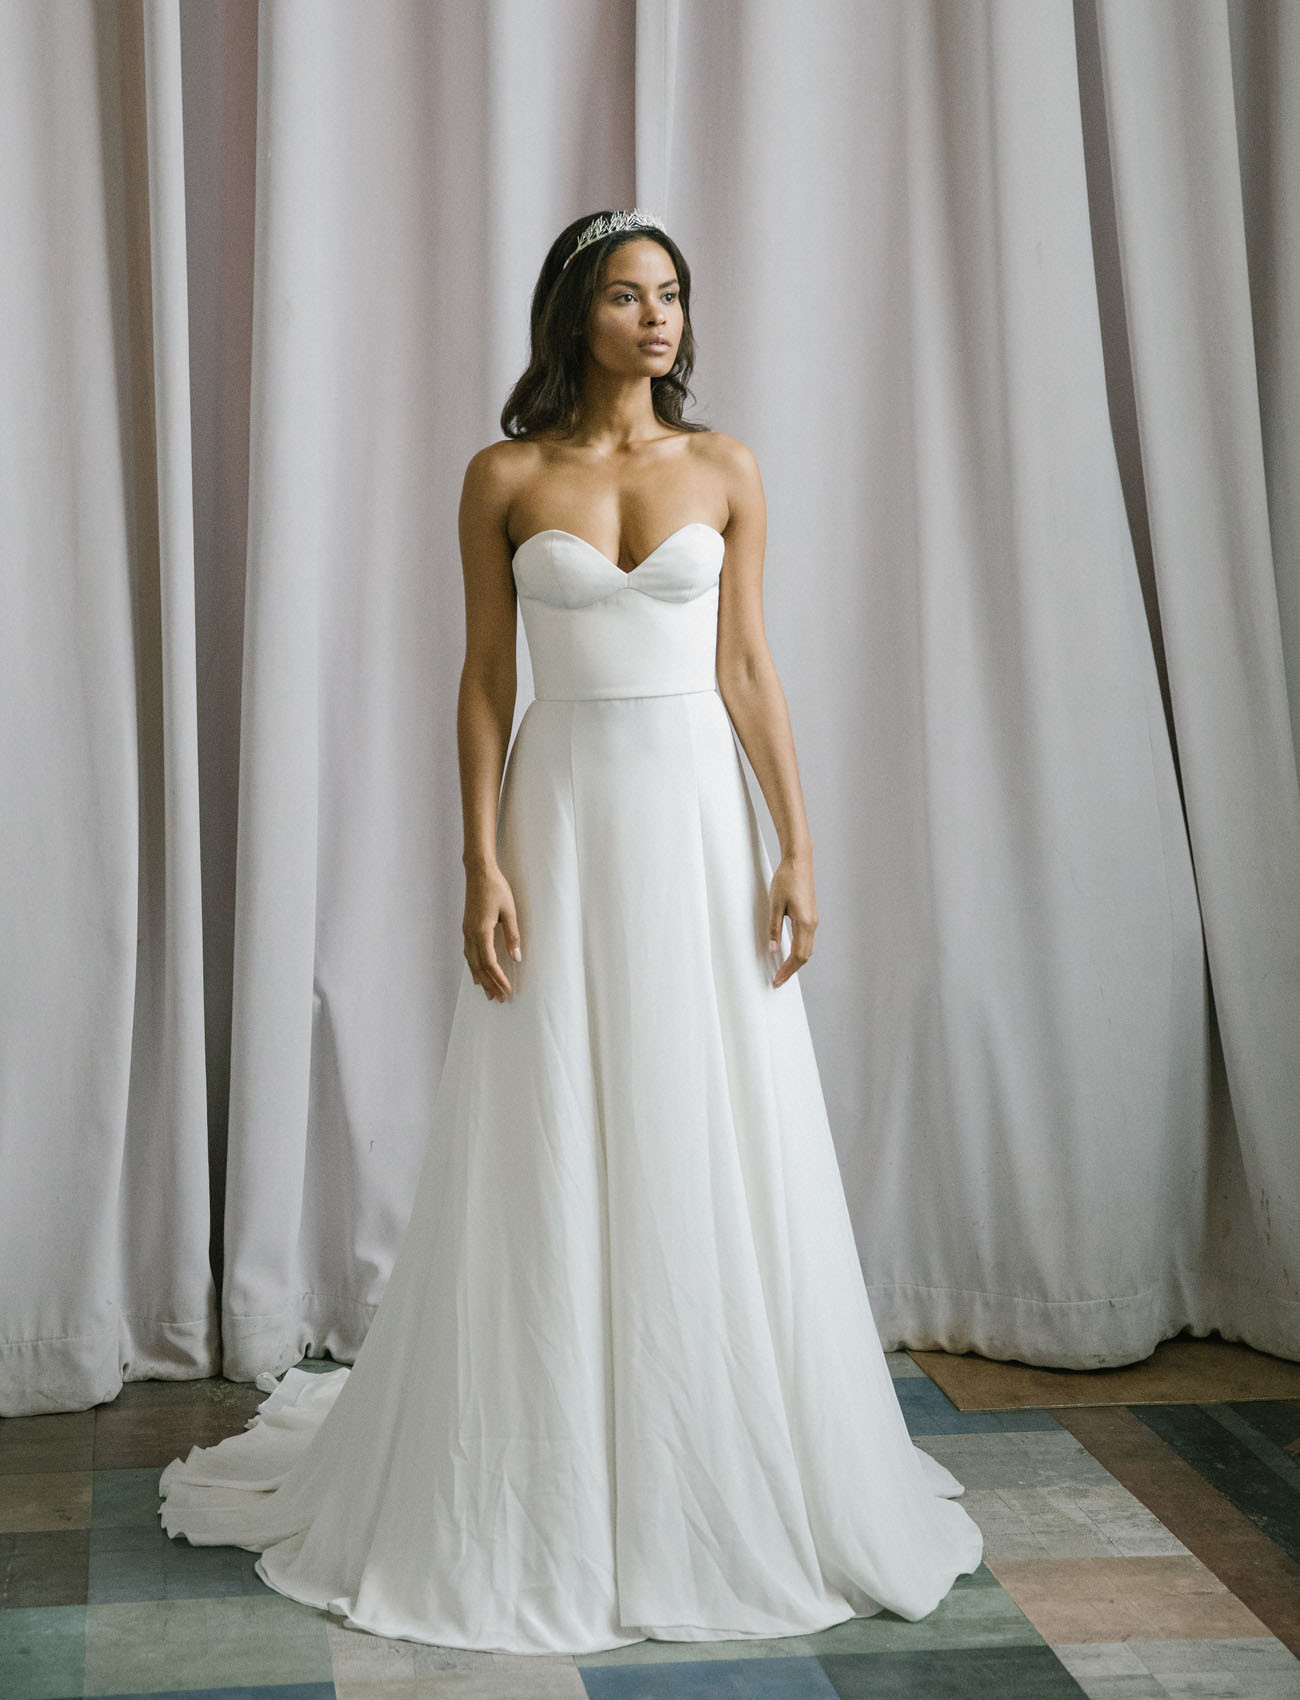 Wedding Dresses New Orleans
 Alexandra Grecco Wedding Gowns Captured in New Orleans